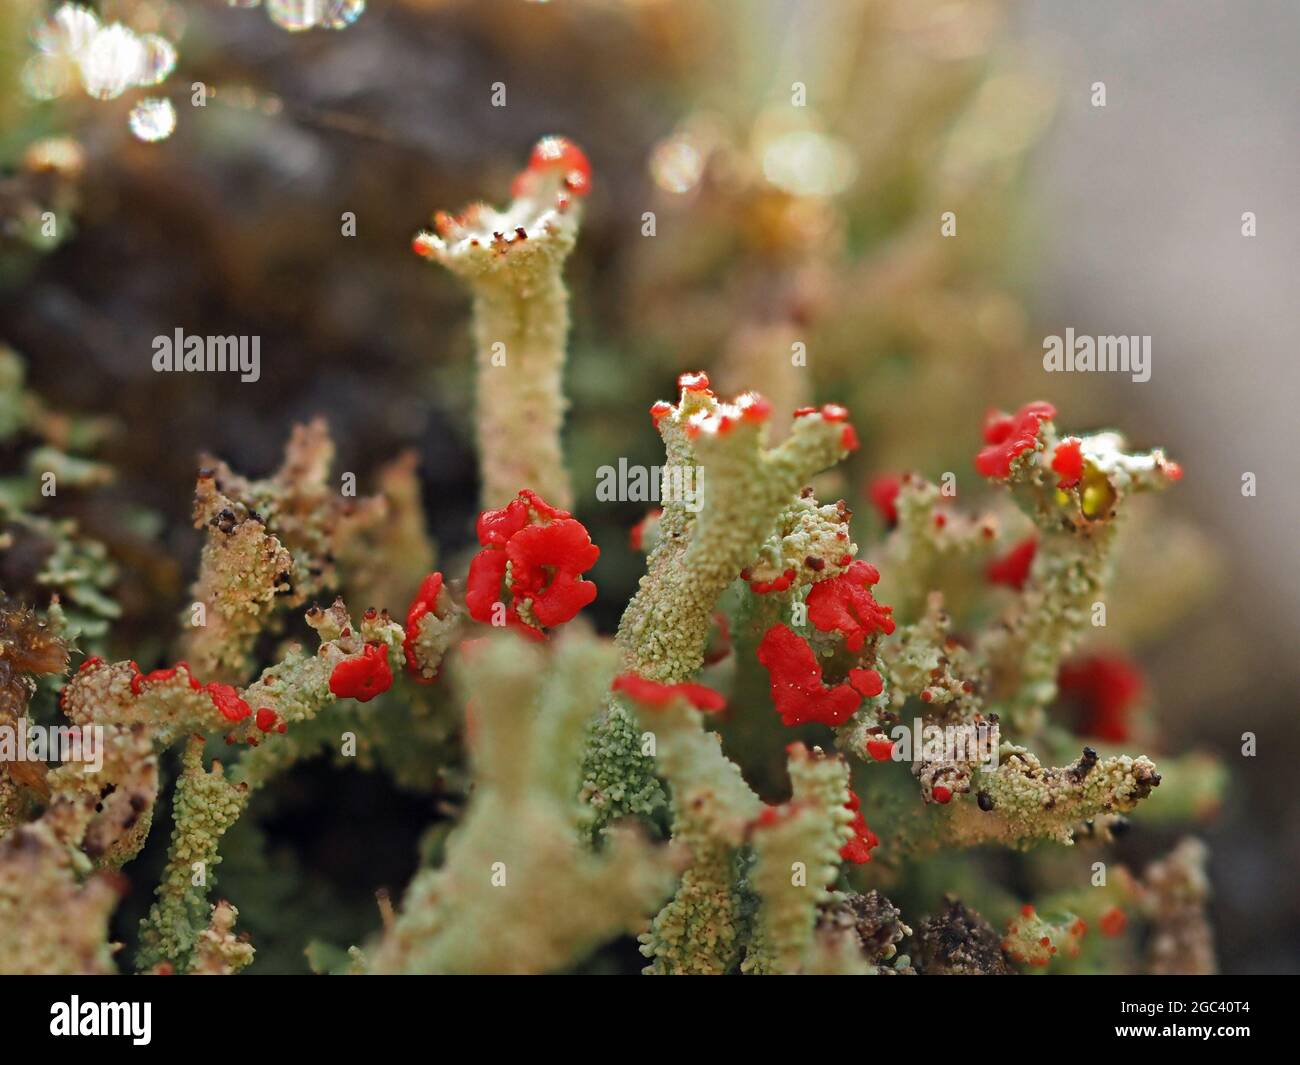 tiny world - red fruiting bodies of Cladonia cristatella – British soldiers lichens on grey frilly stalks  in Cumbria England UK Stock Photo